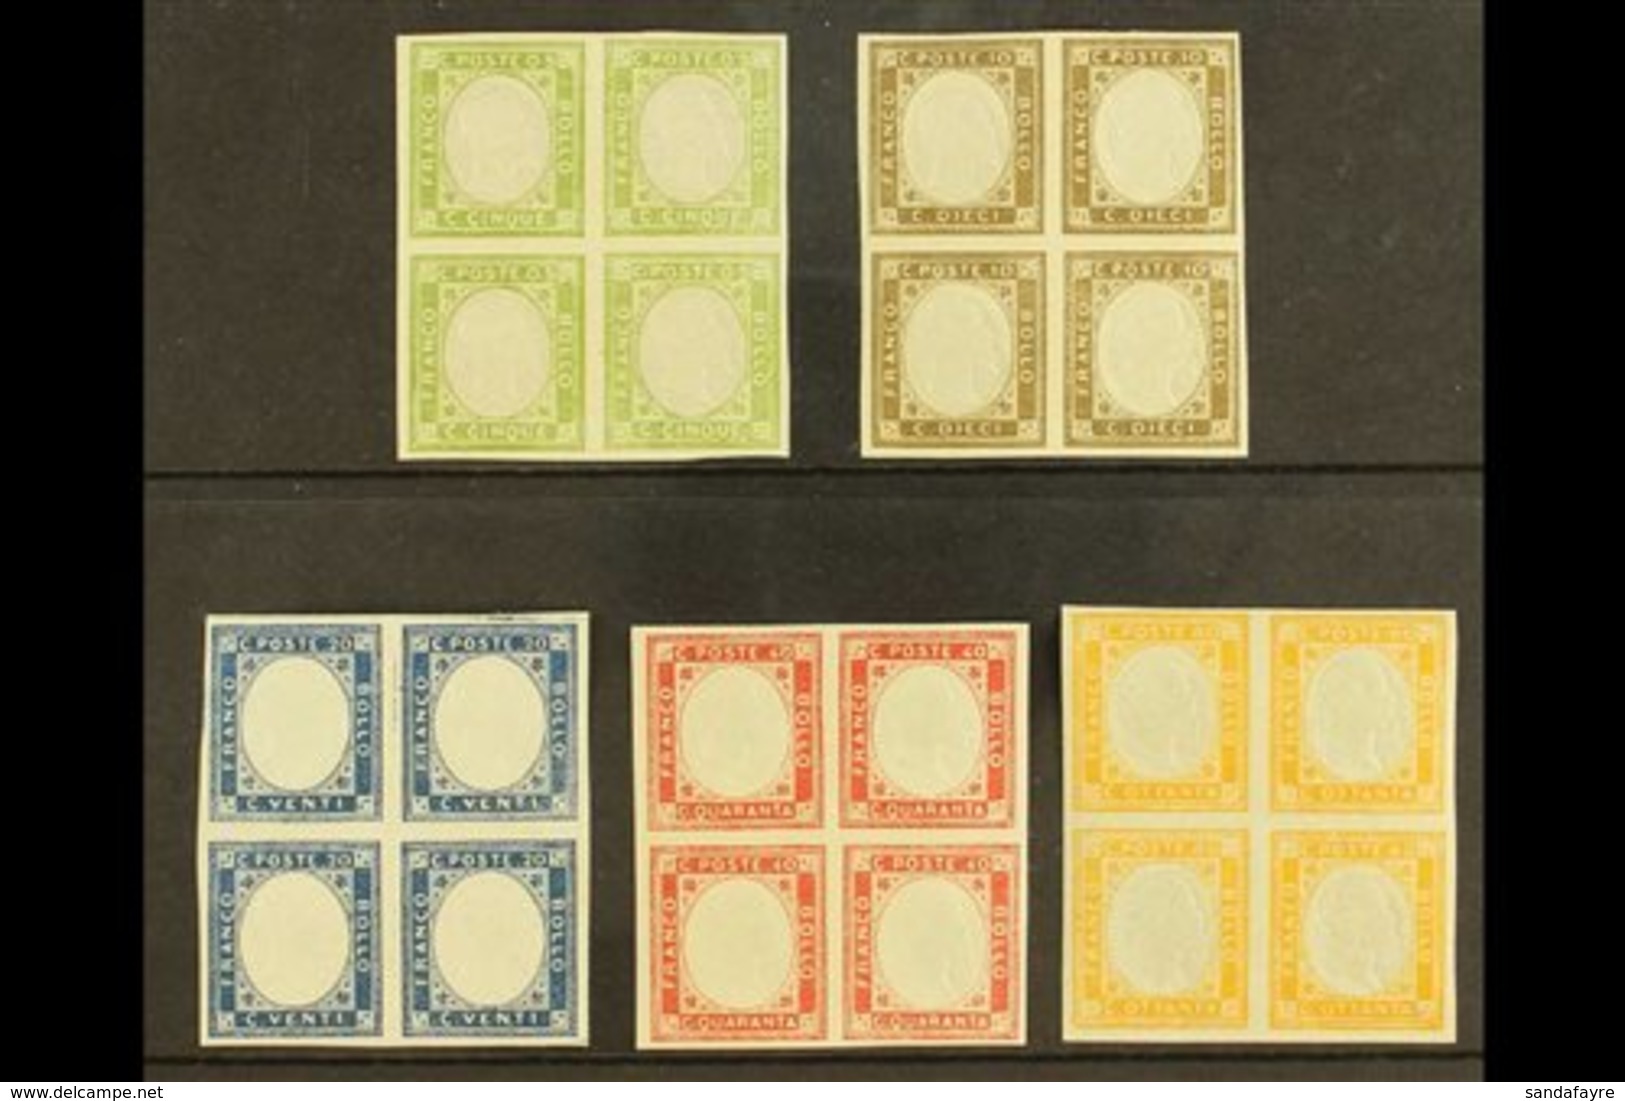 NEAPOLITAN PROVINCES  1861 Local Issue, Complete Set, Sass S1, In Superb BLOCKS OF 4 (2nh, 2og). Cat €1500.(£1125)  (5 B - Unclassified